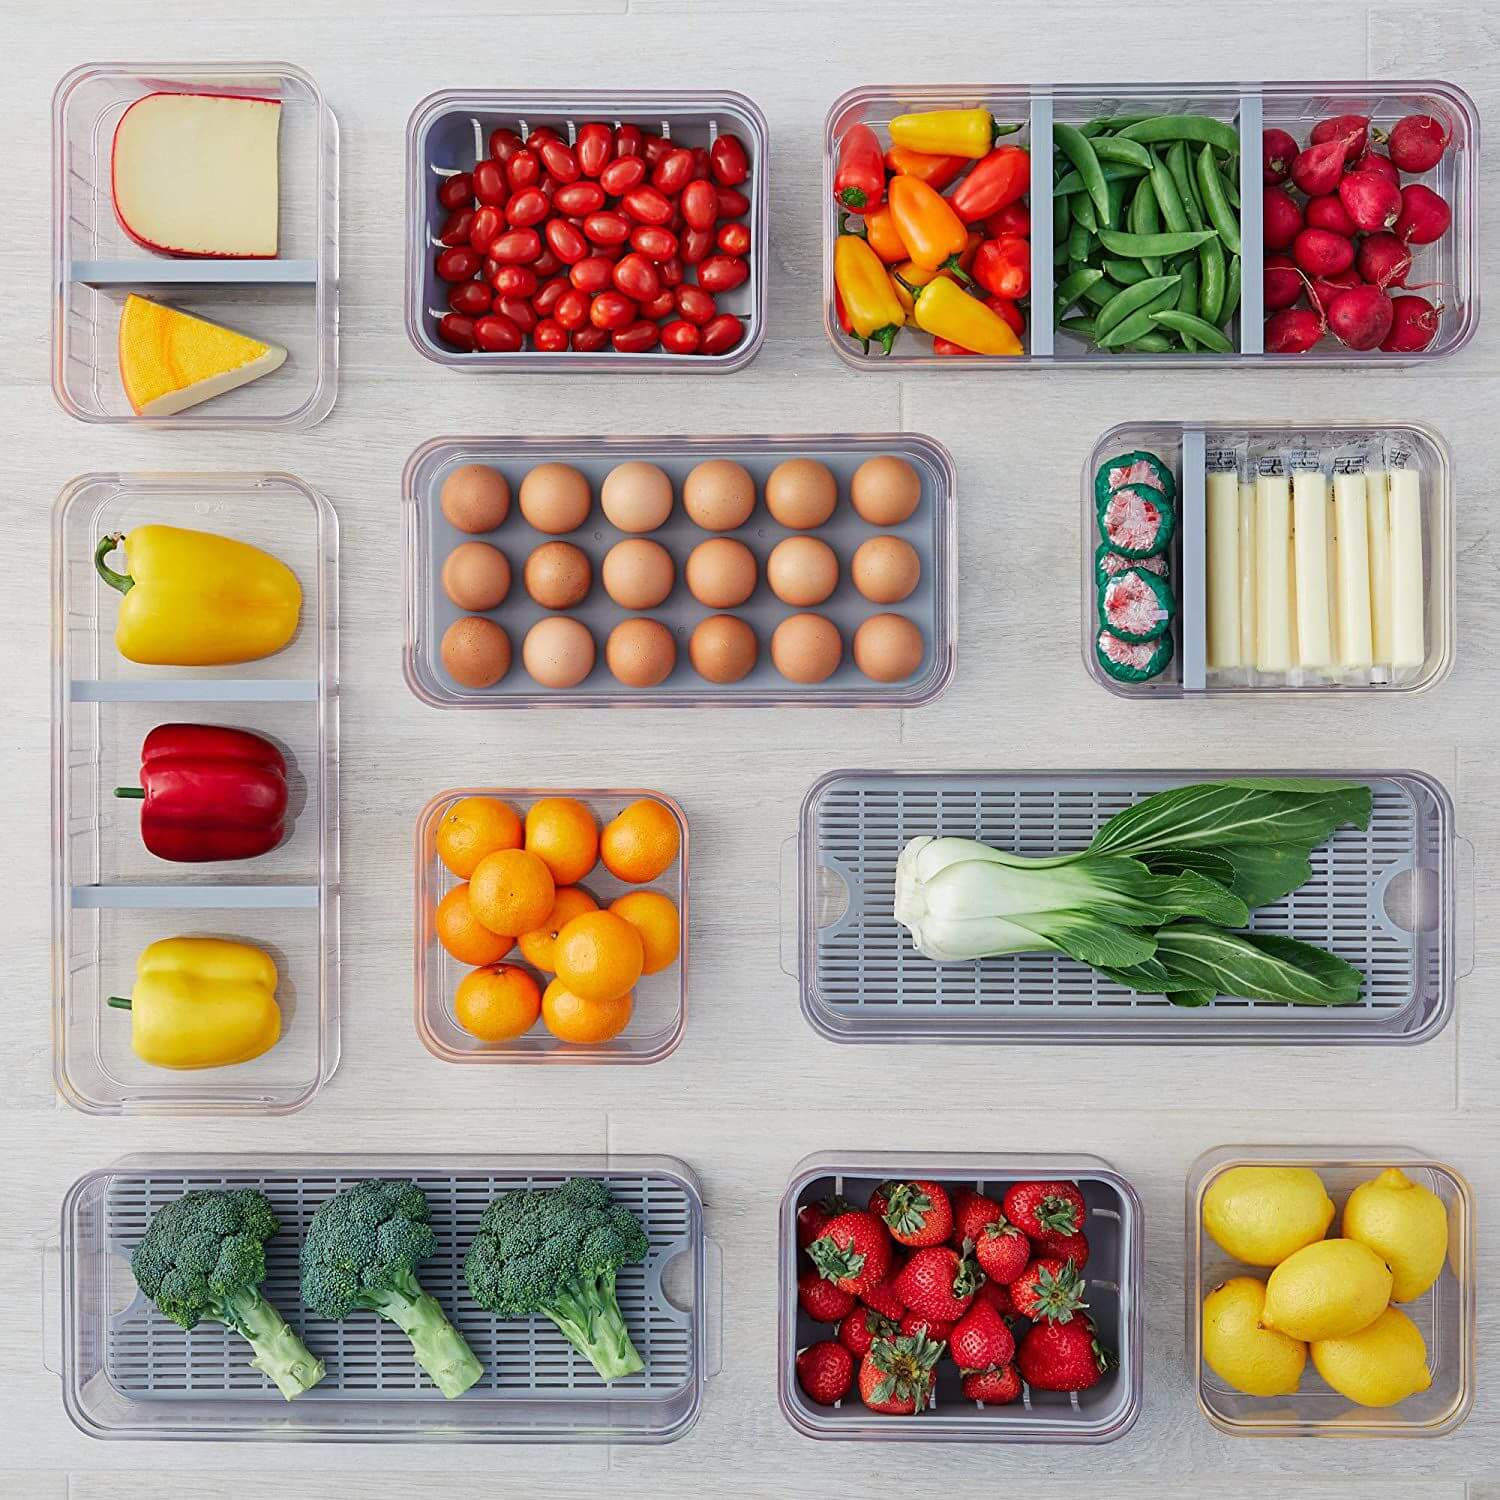 iDesign acrylic kitchen containers organising fresh produce in the kitchen